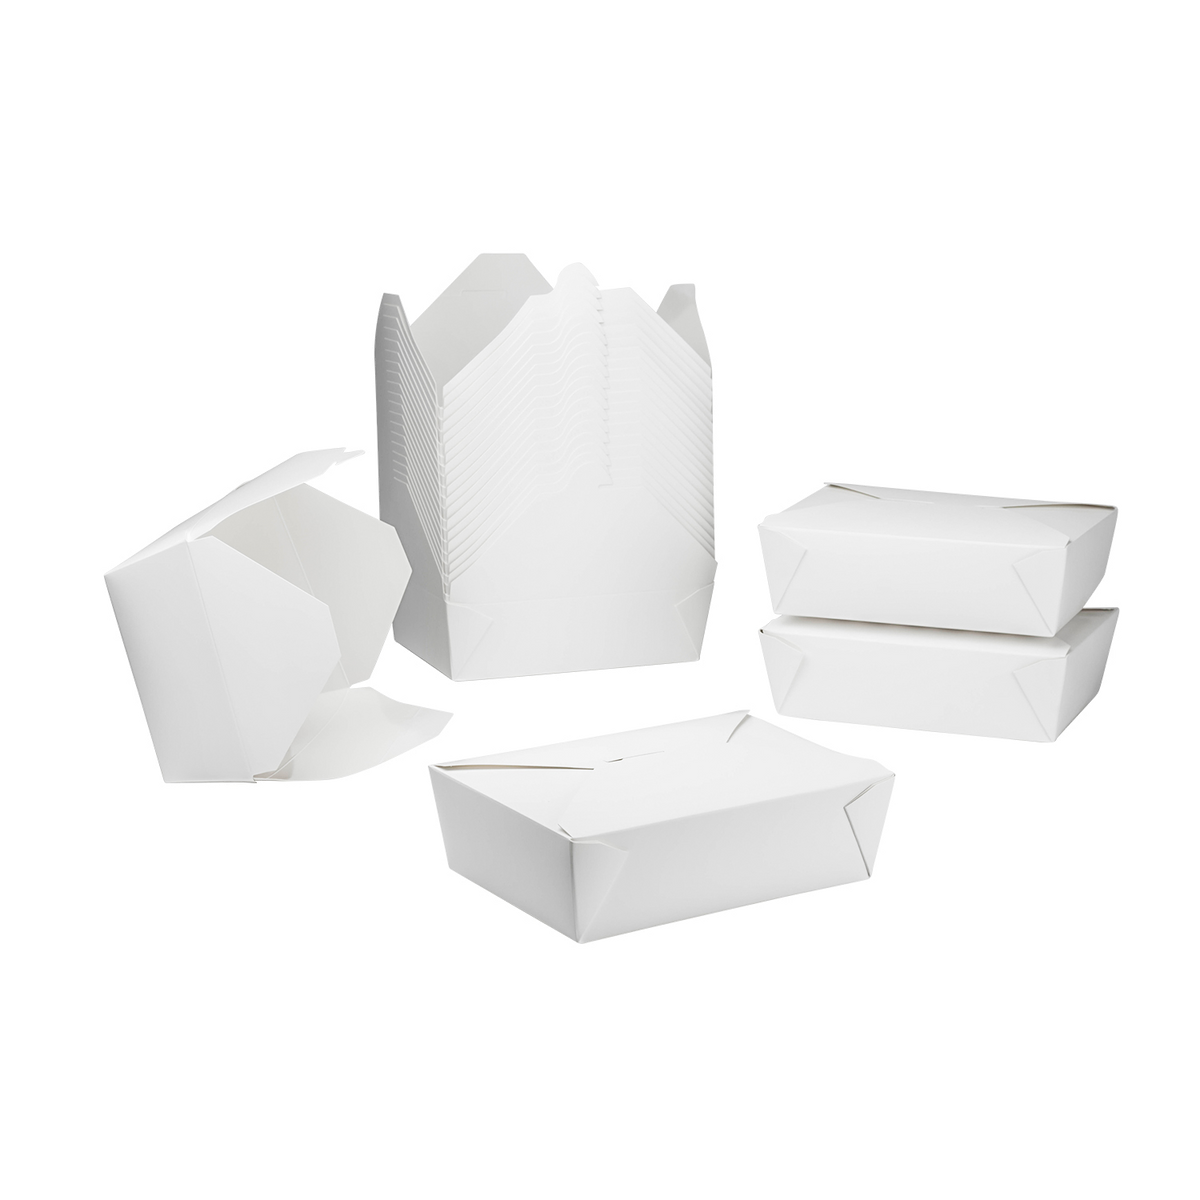 https://www.restaurantsupplydrops.shop/wp-content/uploads/1689/34/get-white-microwavable-folded-paper-3-take-out-container-karat-large-fold-to-go-box-76oz-7-8-x-5-5-x-2-4-200-count-karat-for-less-and-get-the-look-you-would-like_7.png